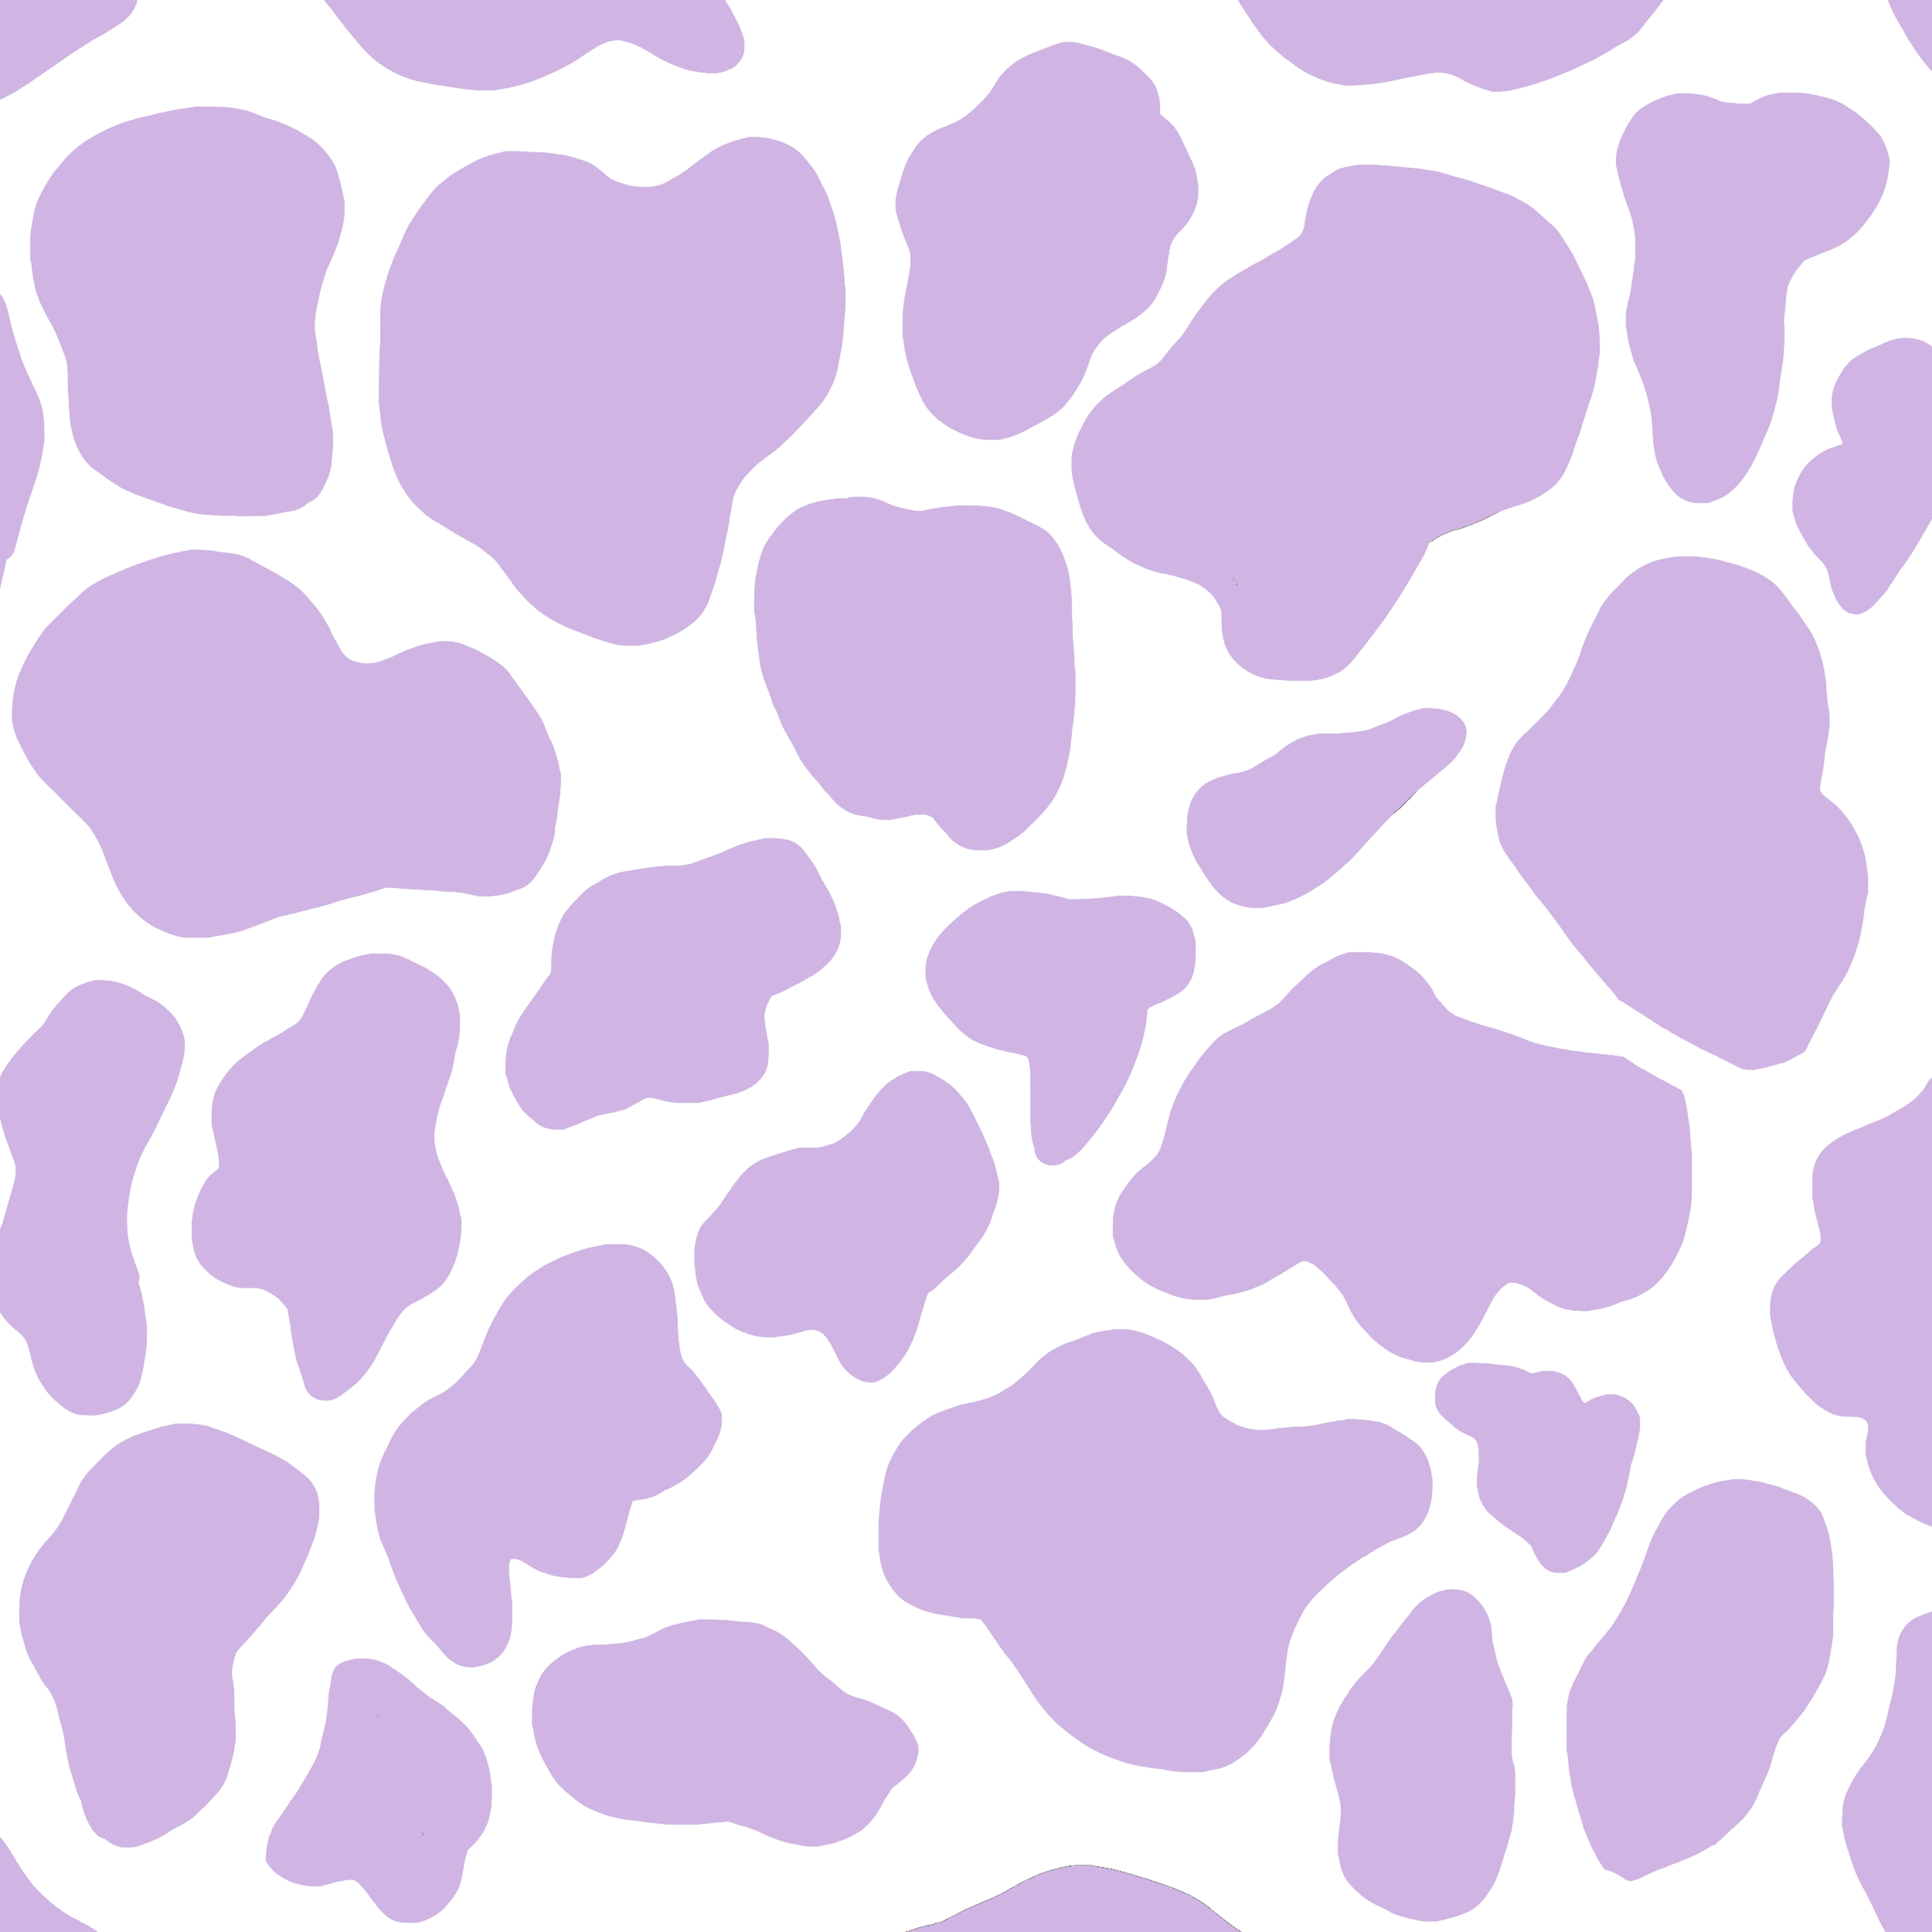 Purple Cow Seamless Pattern Abstract Background Stock Illustration  1954921654